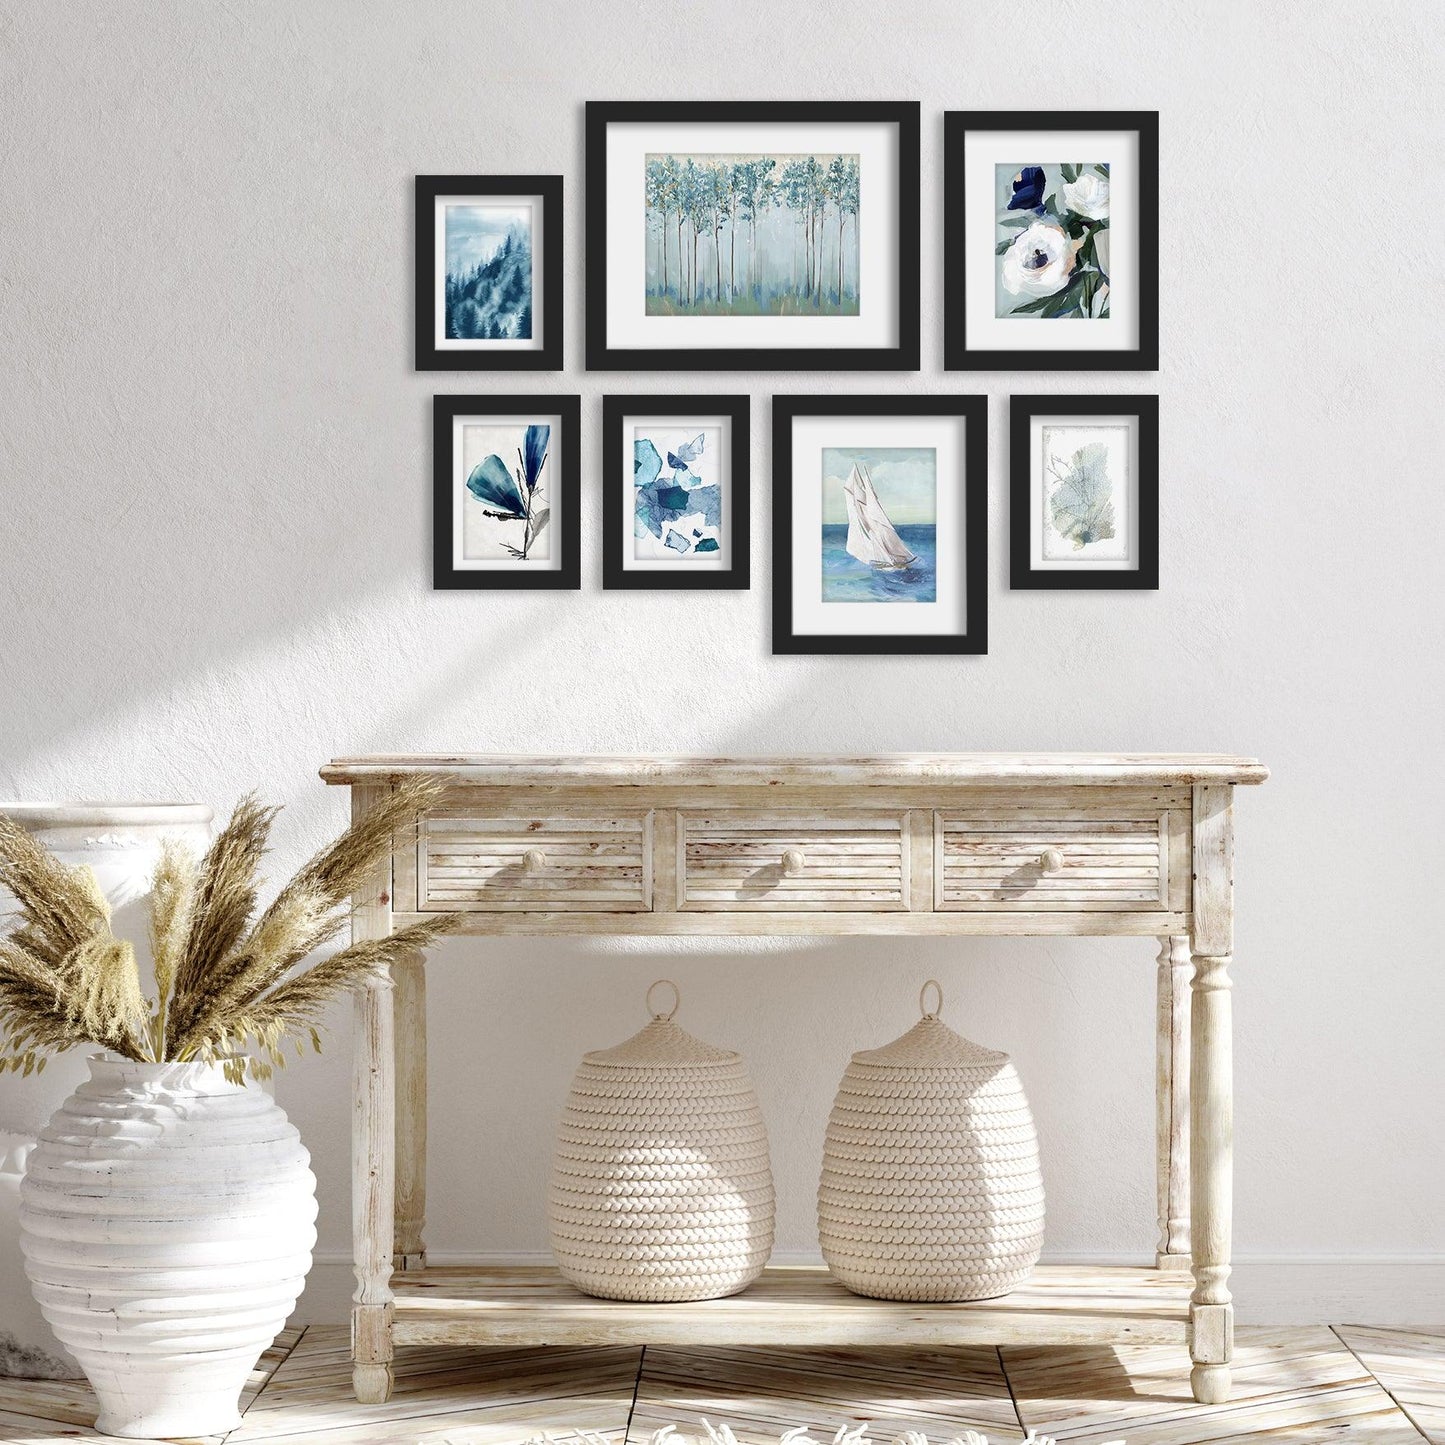 Sightseeing Sailboat by PI Creative - 7 Piece Framed Gallery Wall Art Set - Americanflat